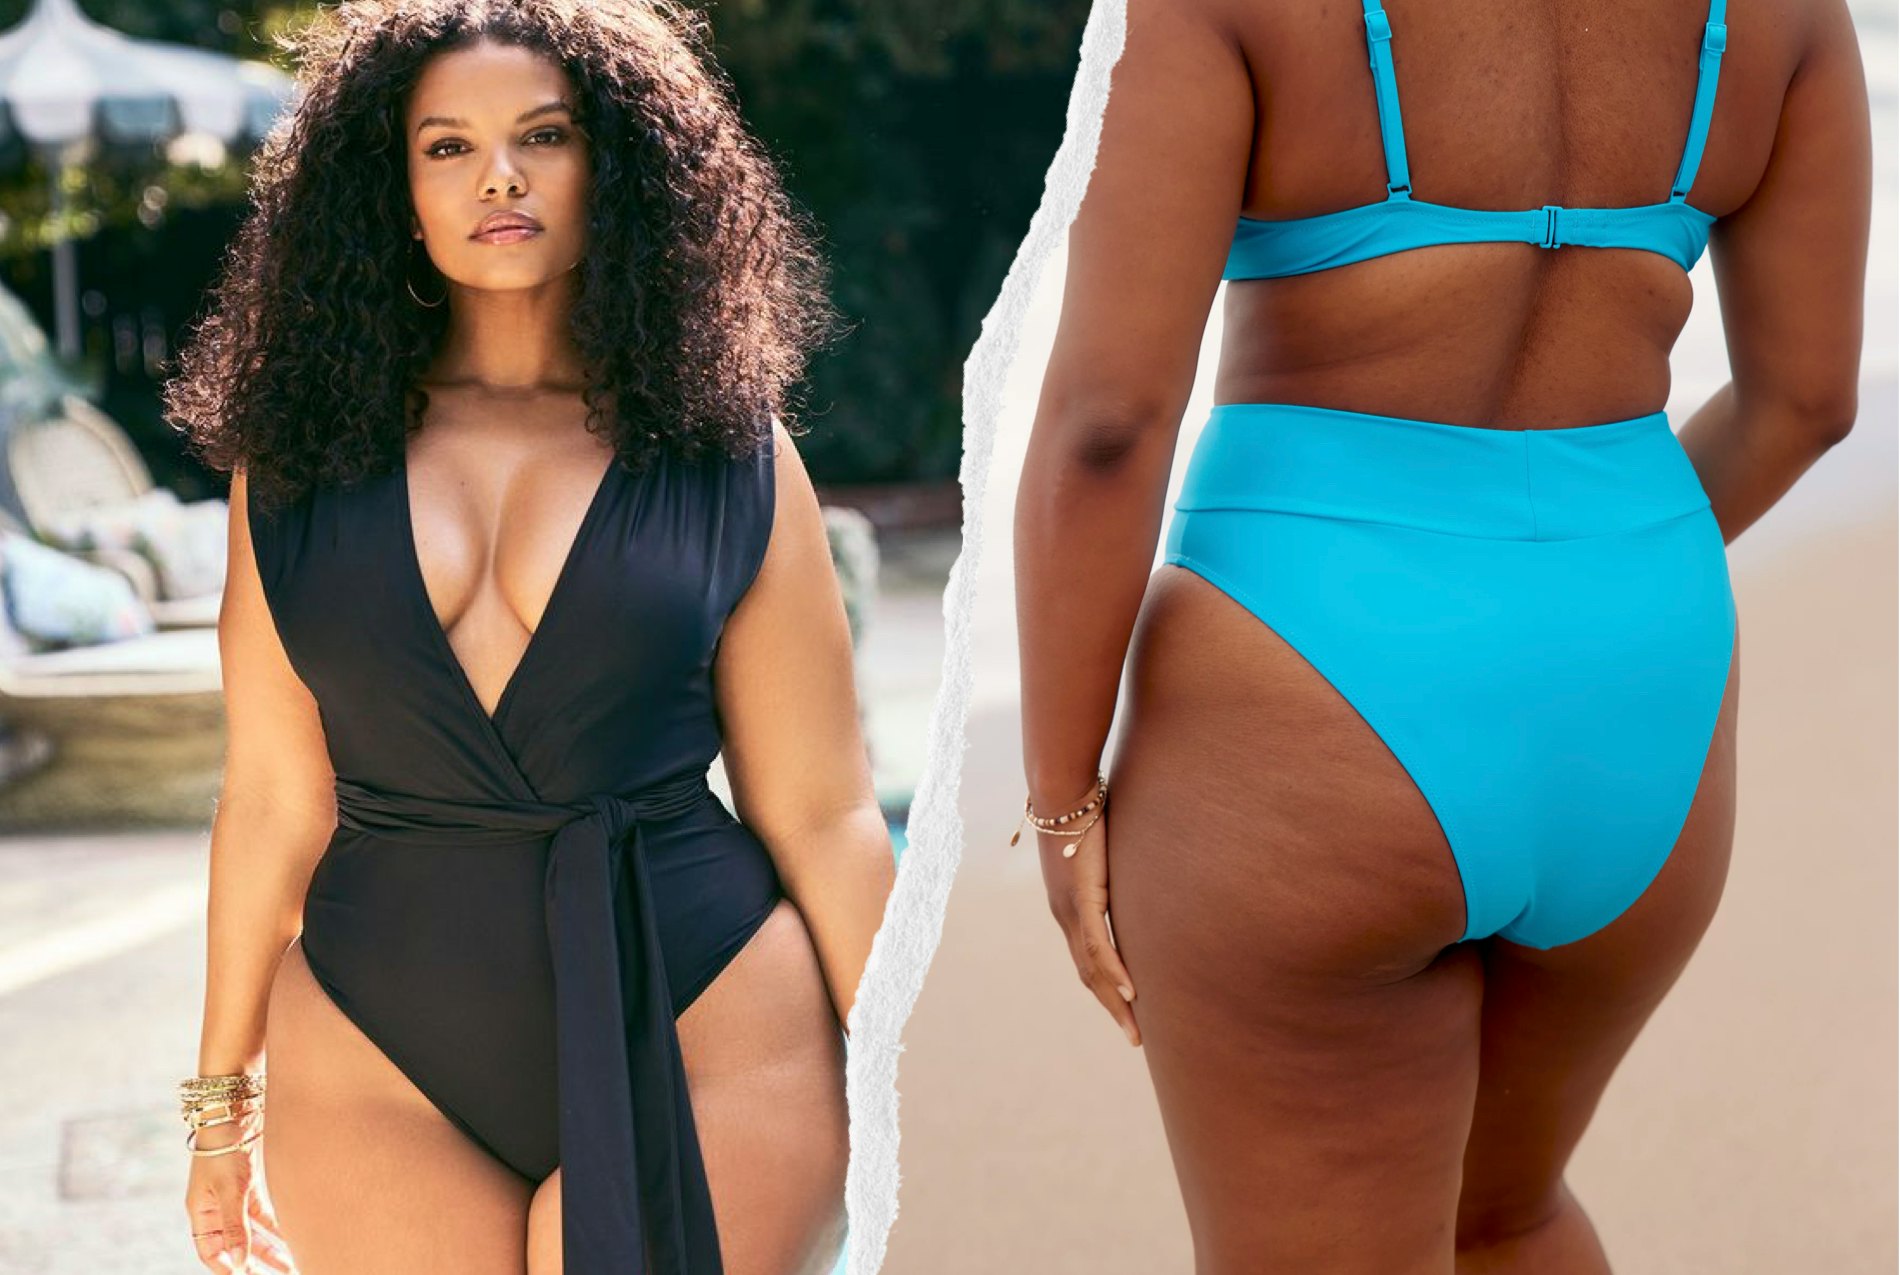 The 11 Best Bikinis For Big Butts, From Thongs To Full-Coverage